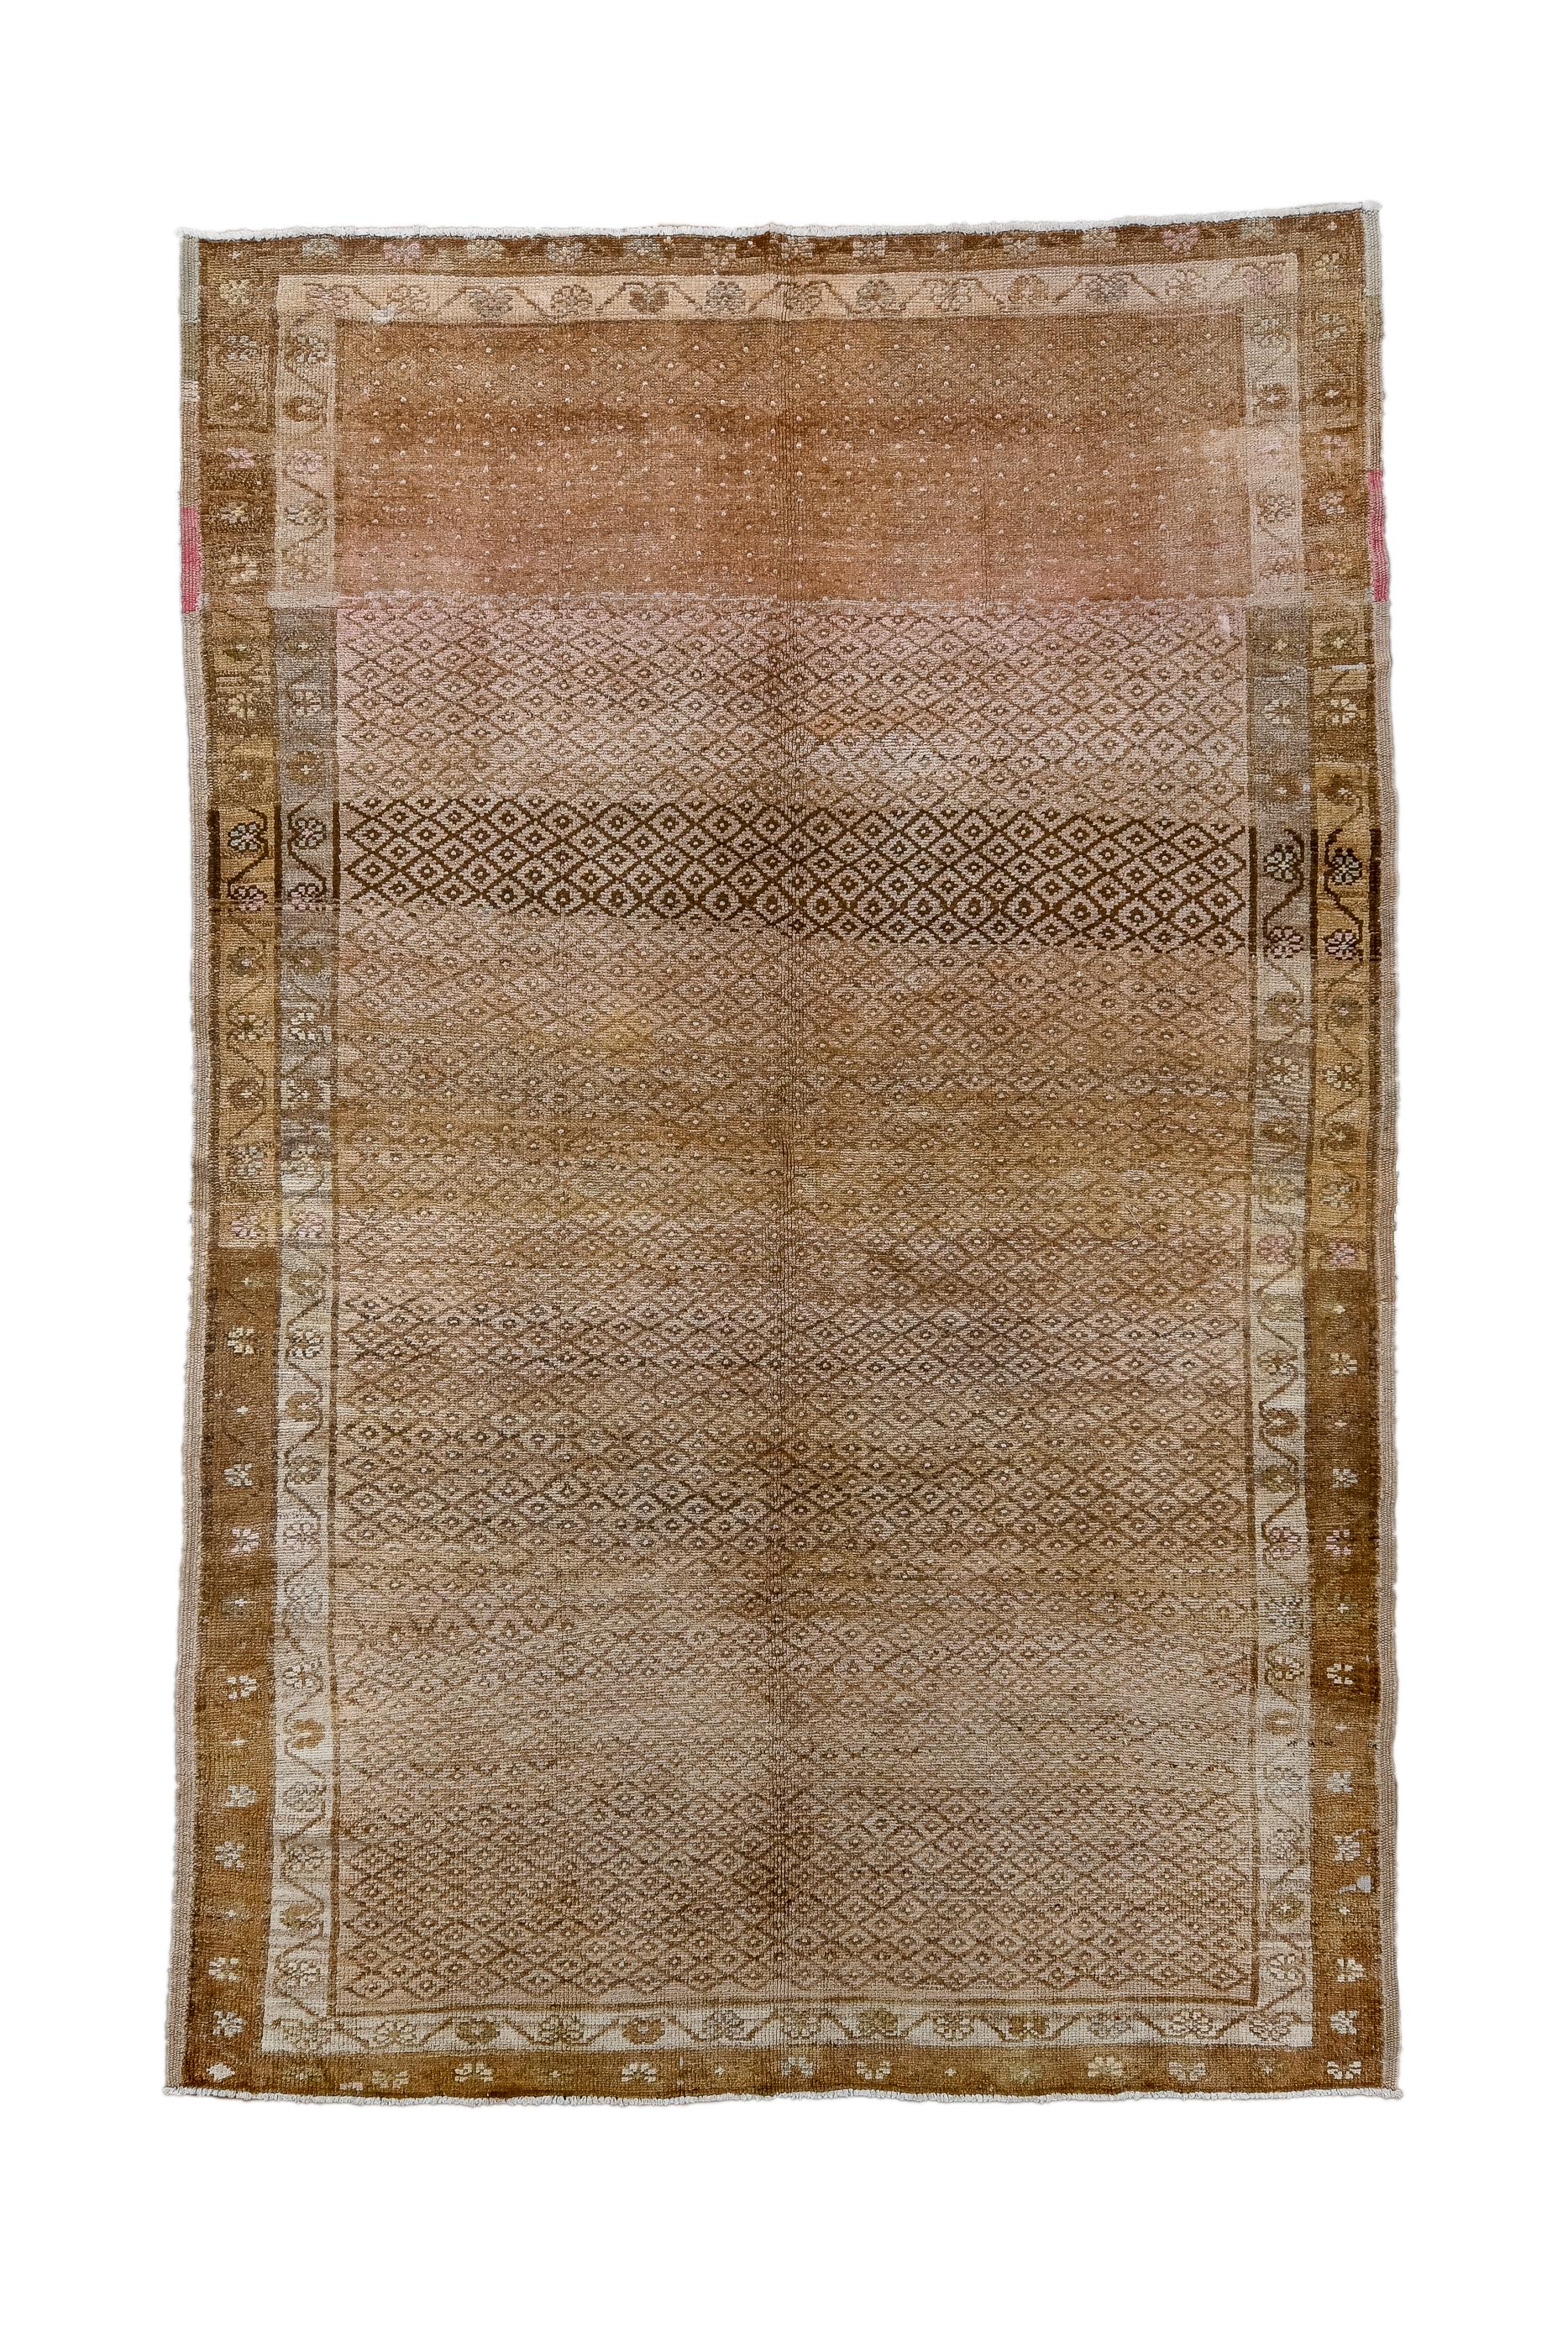 Not an Oushak, but a village weaving, probably closer to central Turkey, with a field panel abrashing from light brown to dark chocolate, with a very close overall pattern of little lozenges. Abrashed borders, both with reversing fan palmettes on a